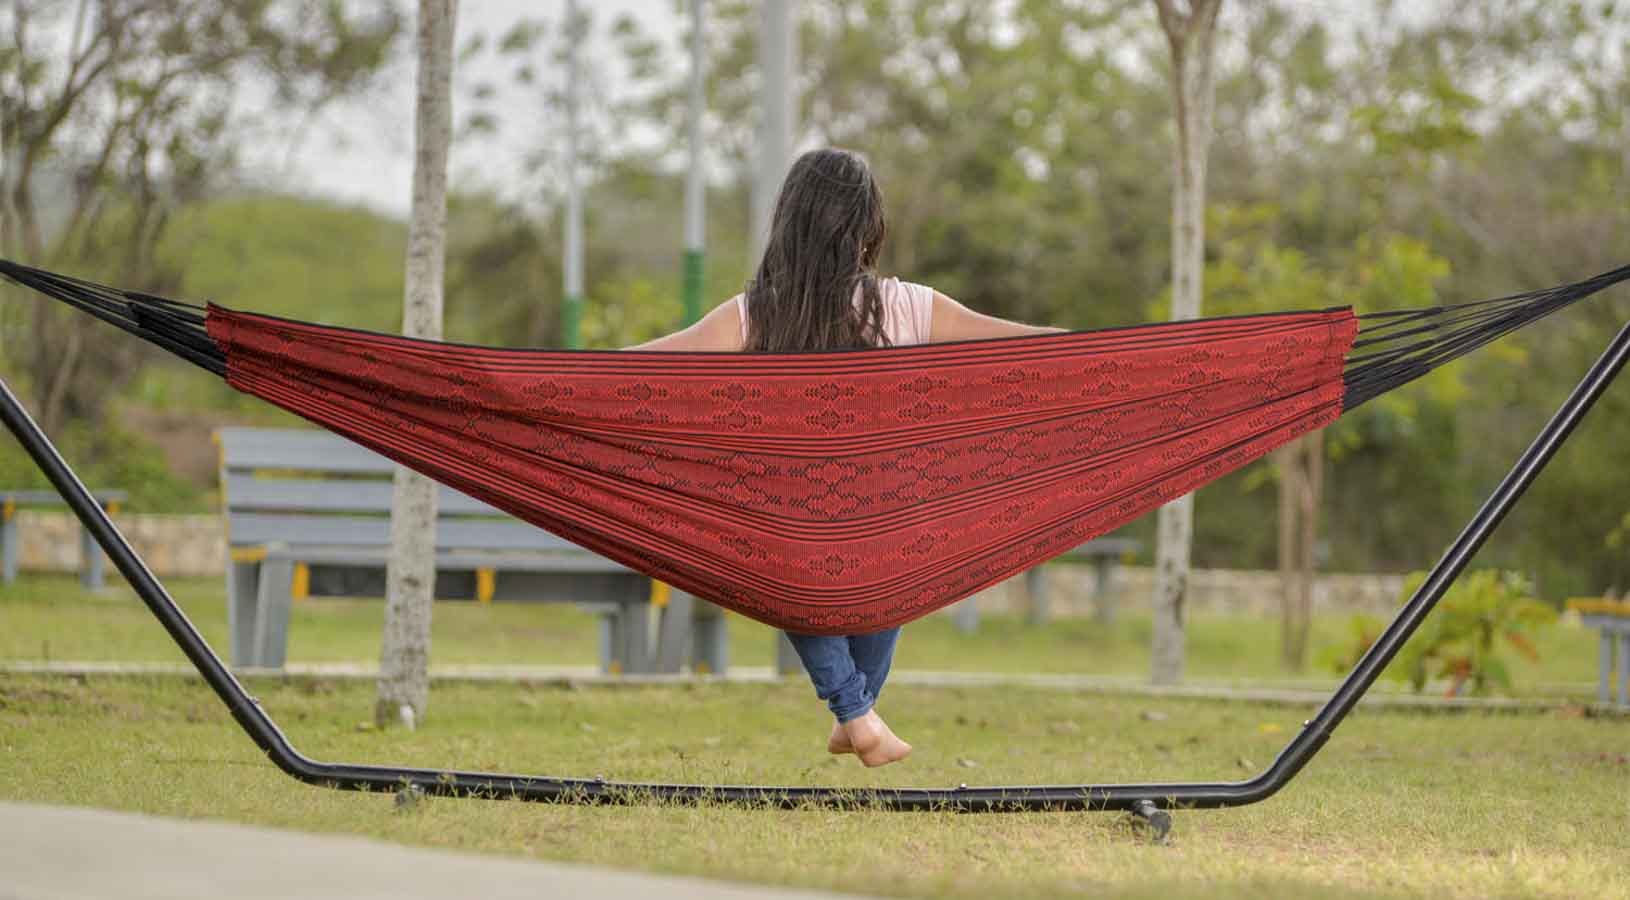 Typical Colombian Hammocks - Typical Red Hammock